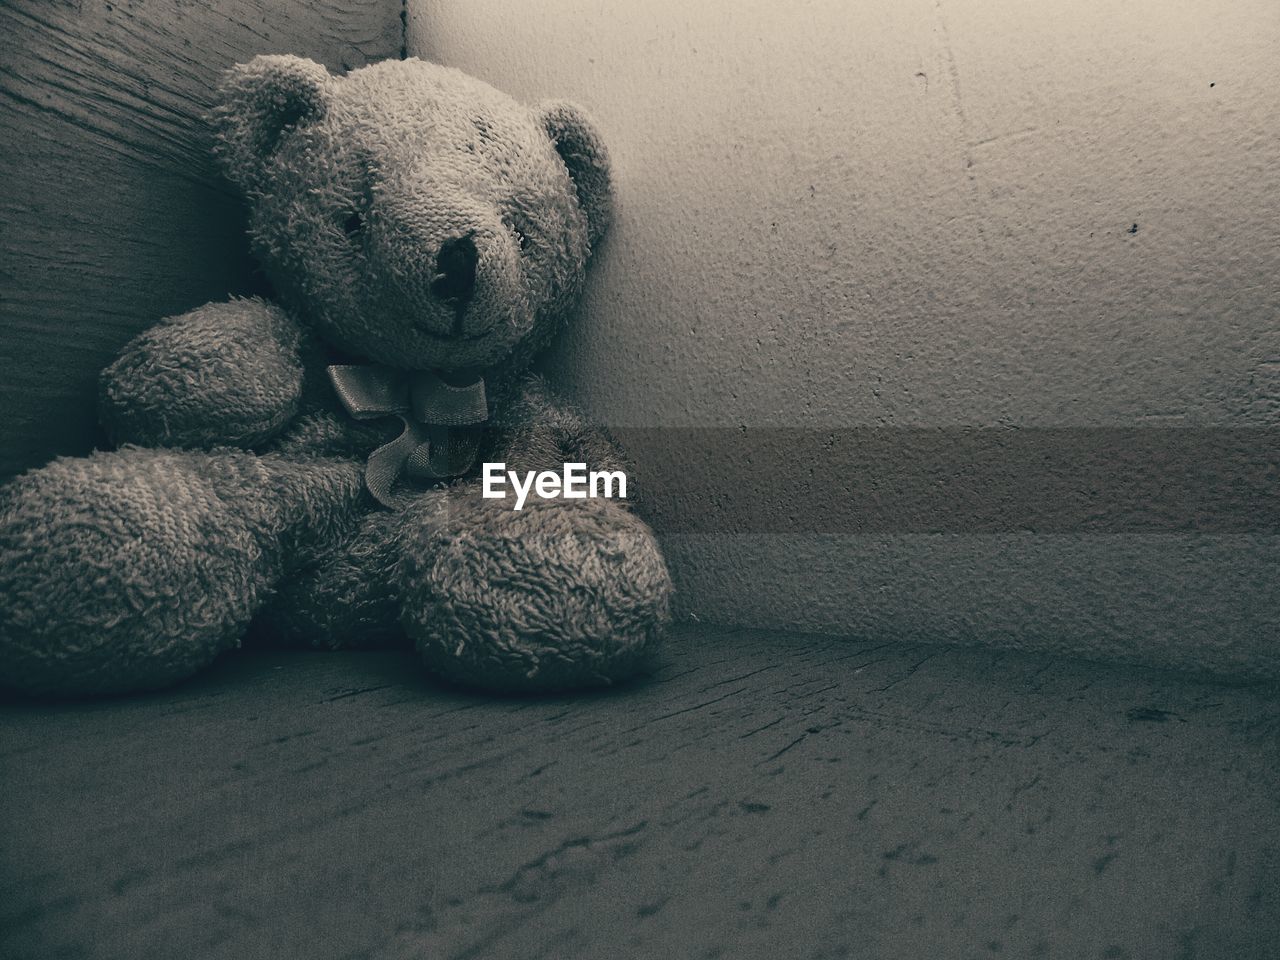 teddy bear, stuffed toy, toy, animal representation, indoors, no people, childhood, close-up, day